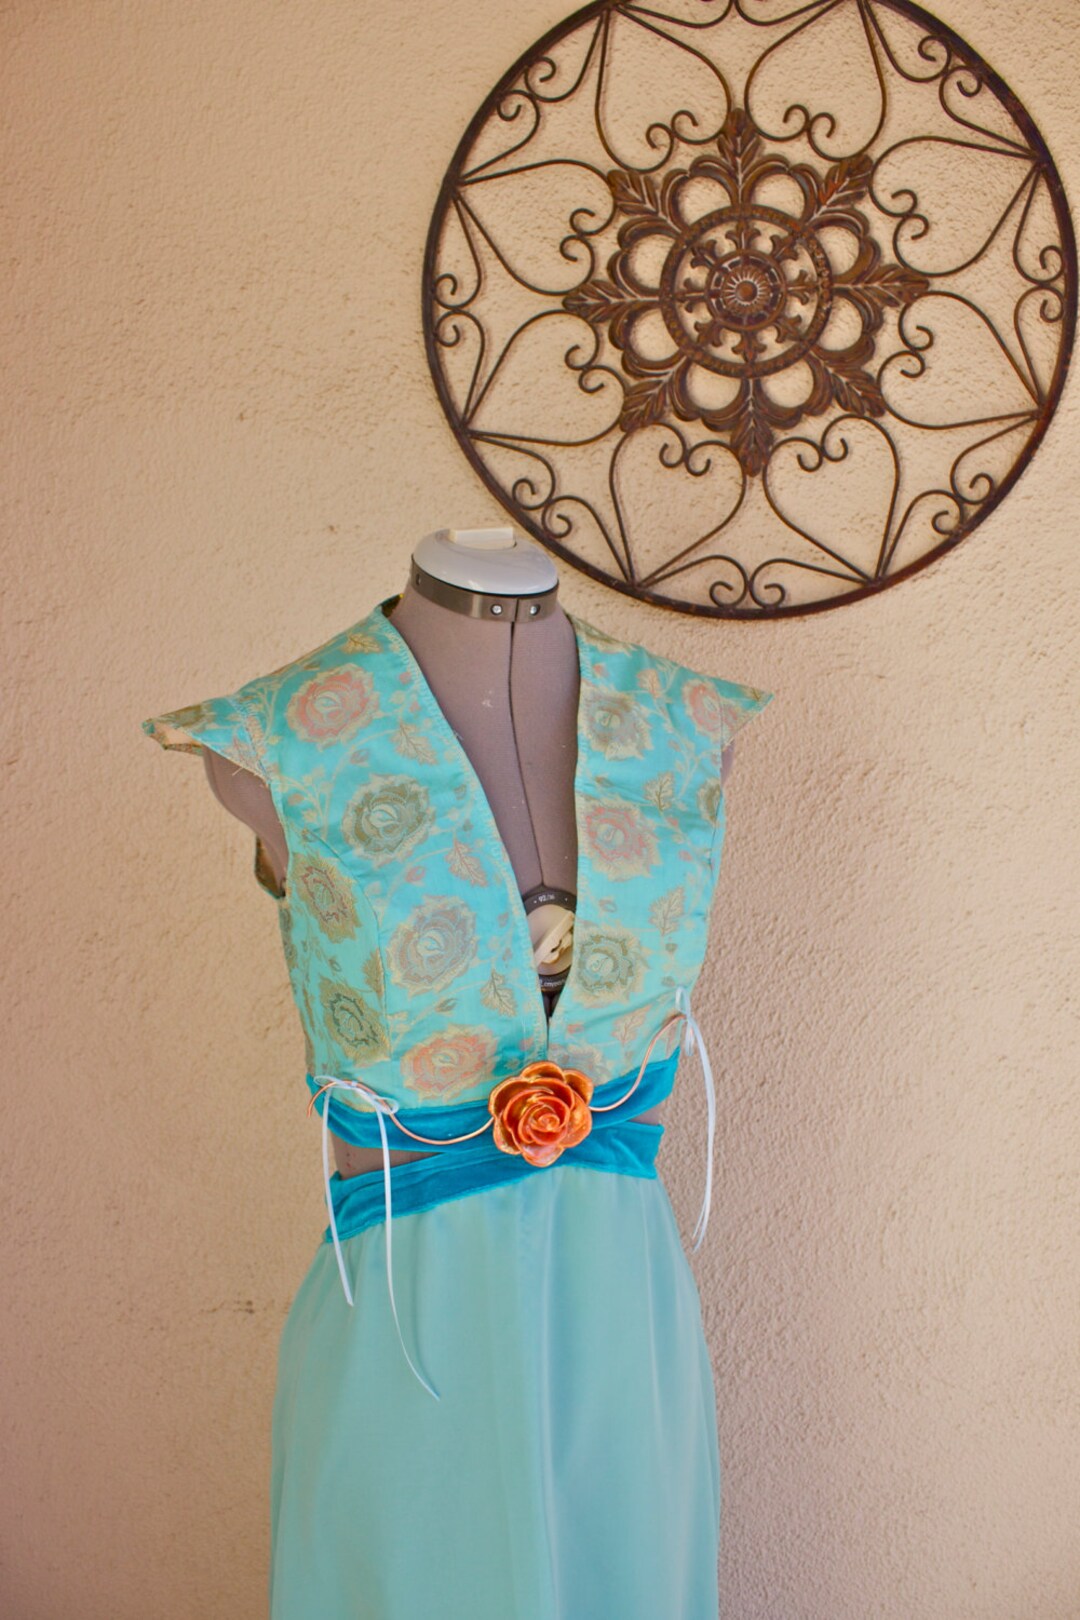 Margaery Tyrell Dress COMMISSION ONLY rose Belt Sold Separately - Etsy